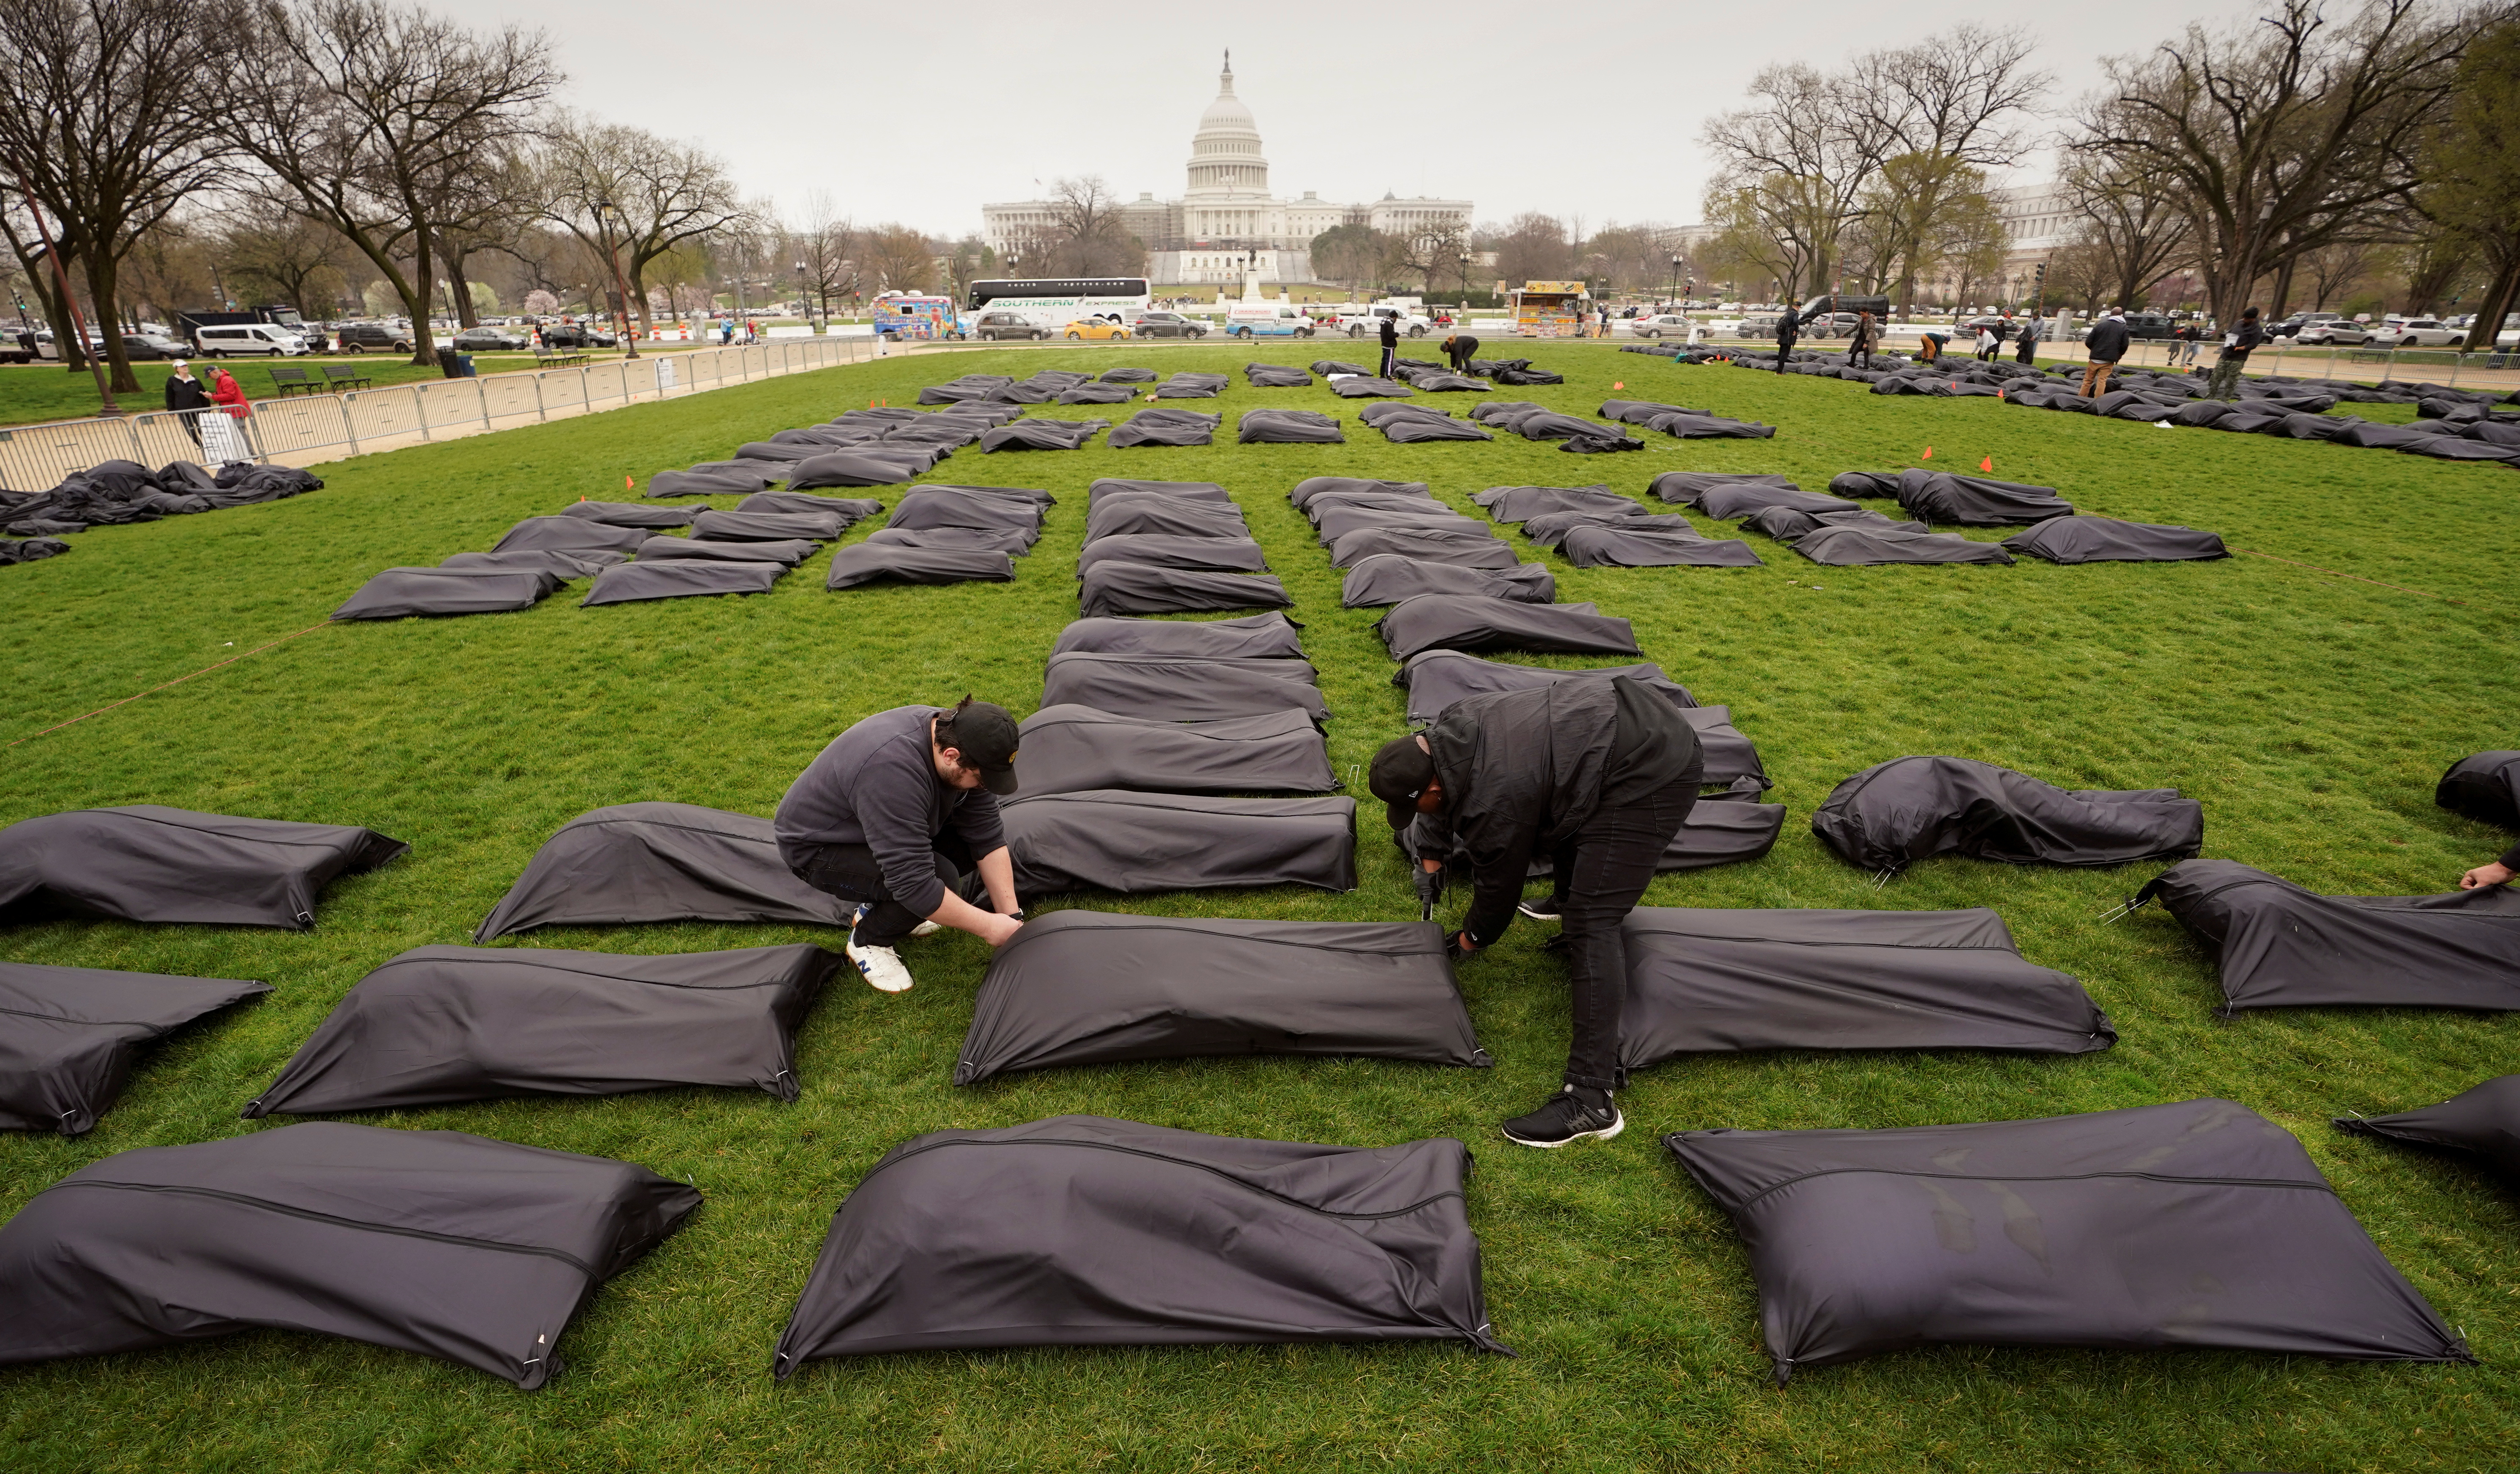 Gun control activists place body bags on the National Mall in Washington